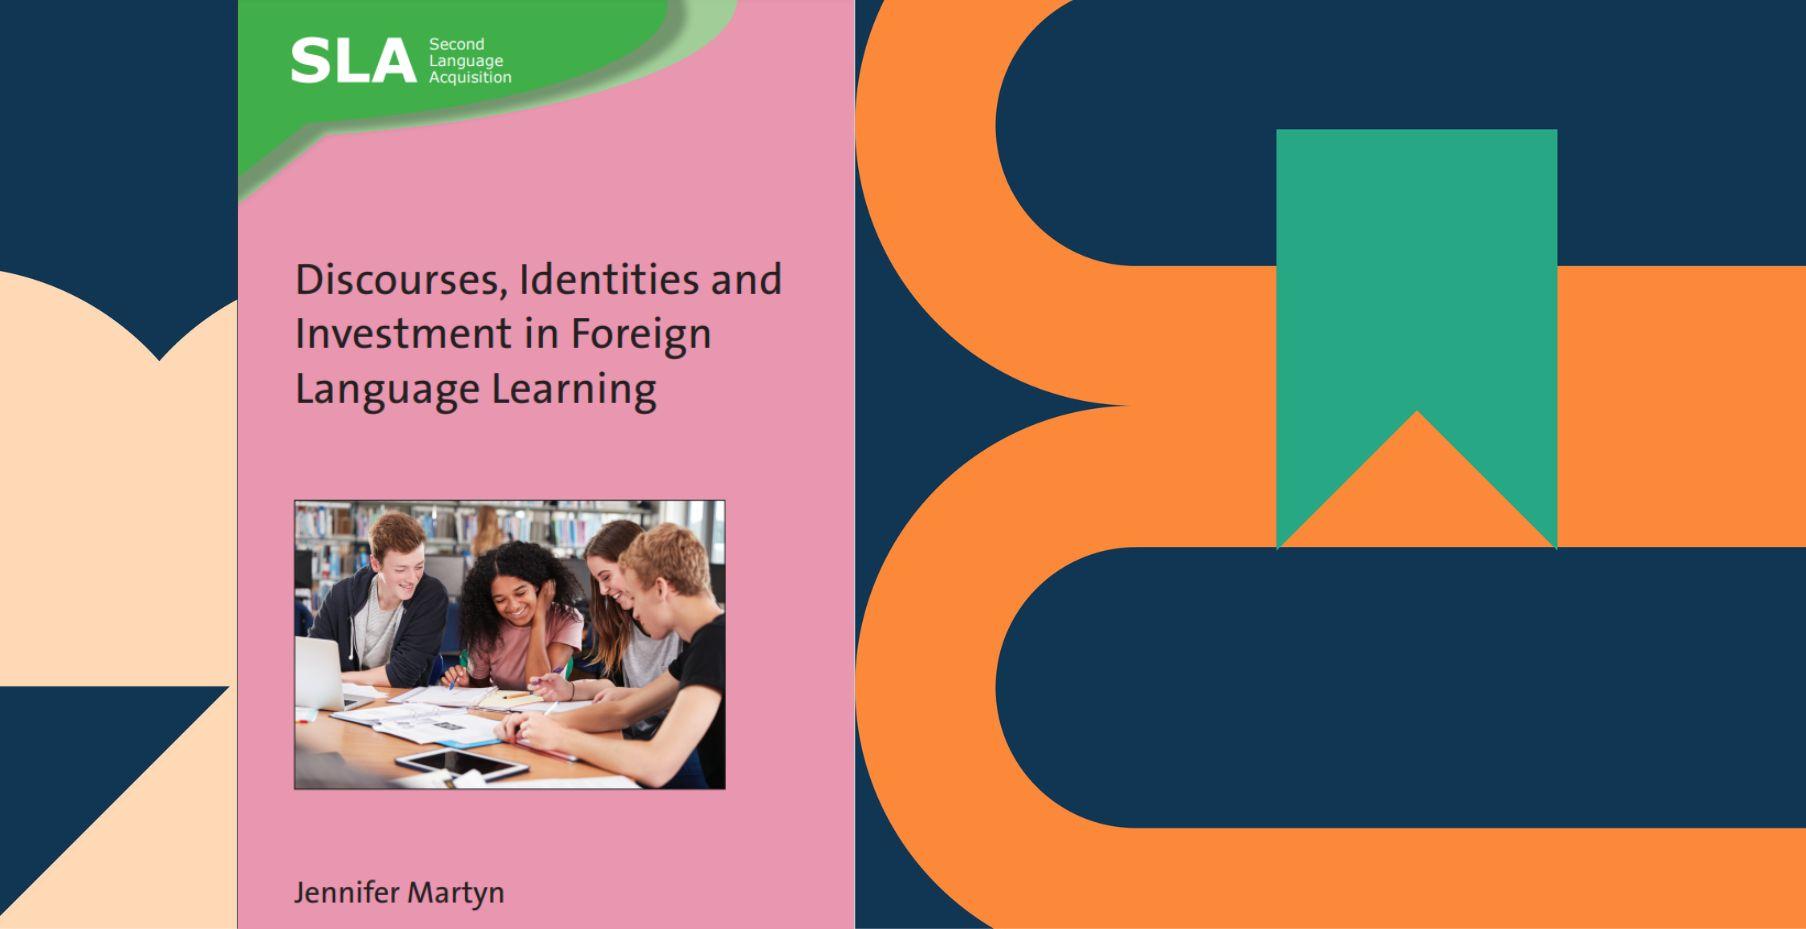 Discourses, Identities and Investment in Foreign Language Learning by Dr Jennifer Martyn from DCU's School of Applied Language and Intercultural Studies